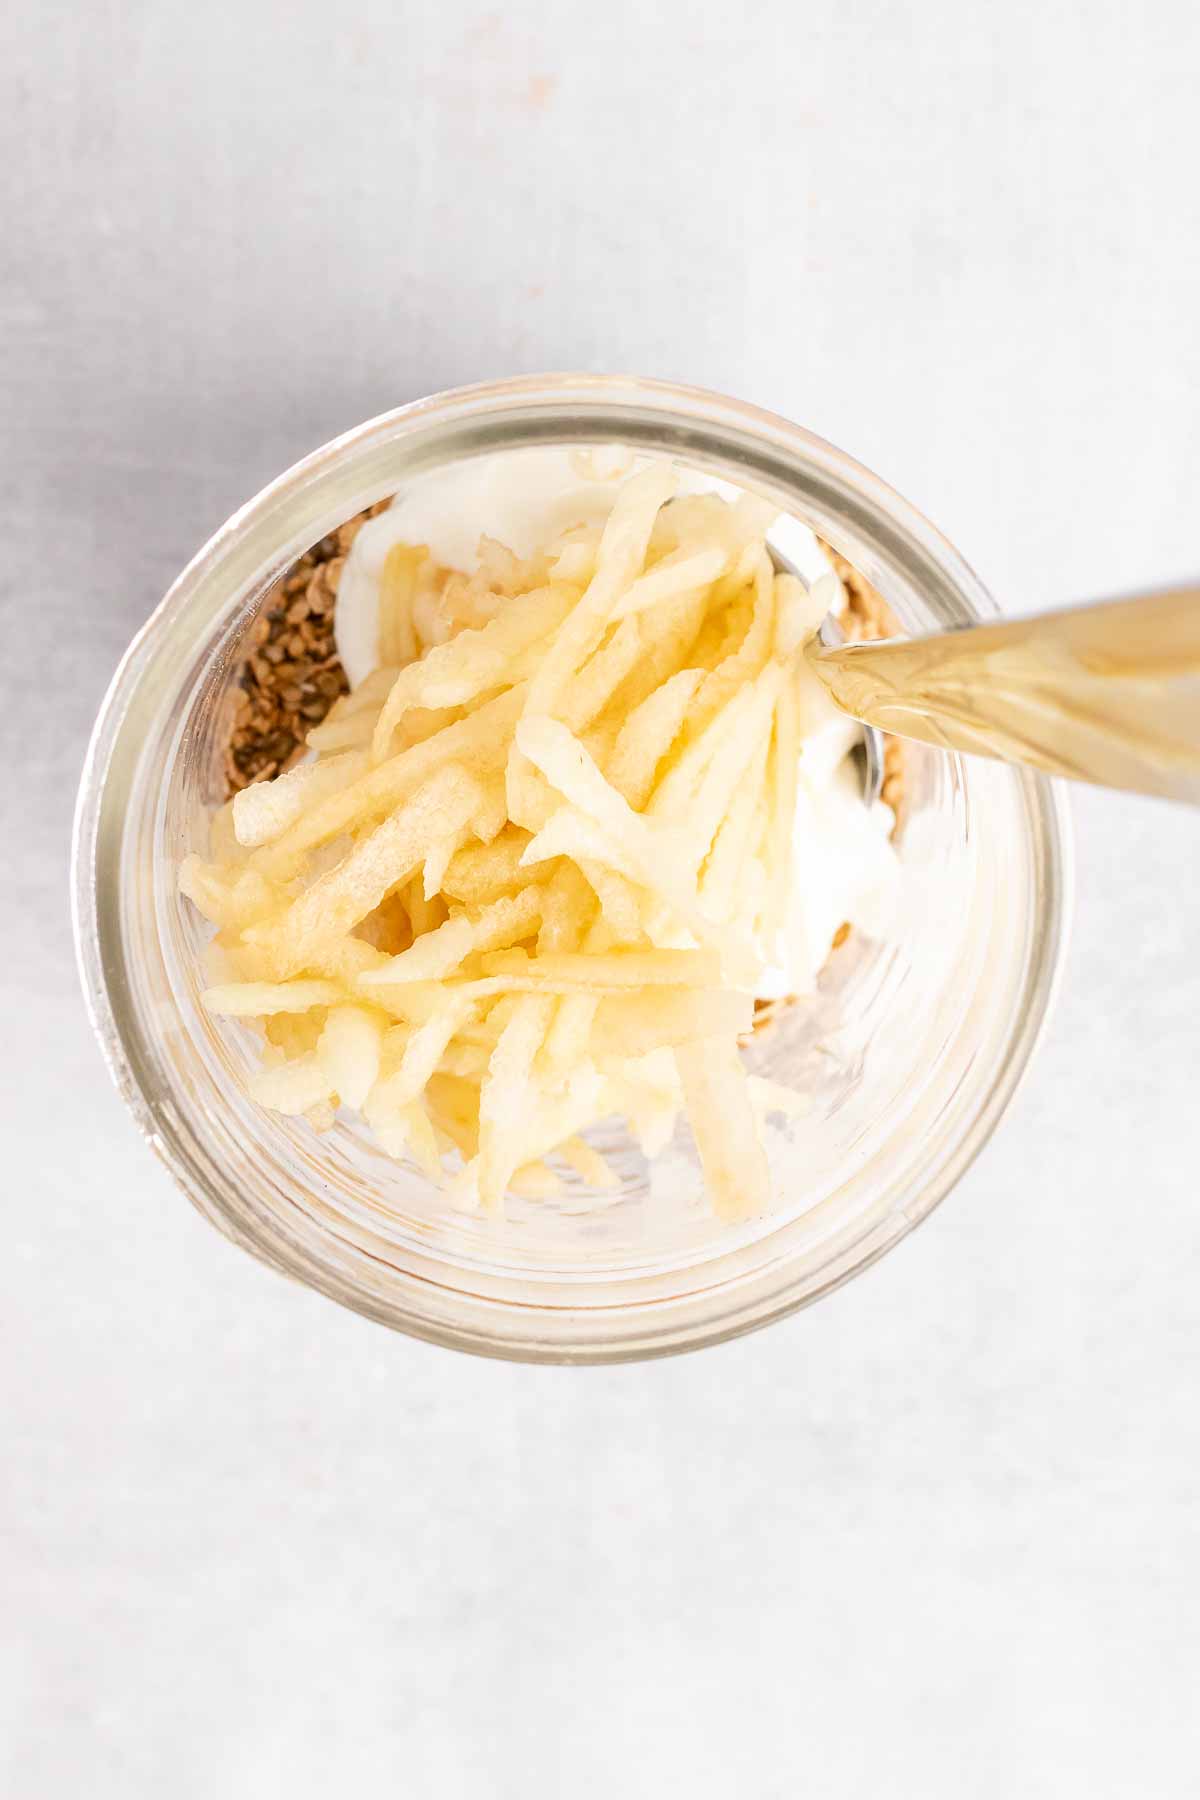 Shredded apple and greek yogurt added to the jar, as seen from above